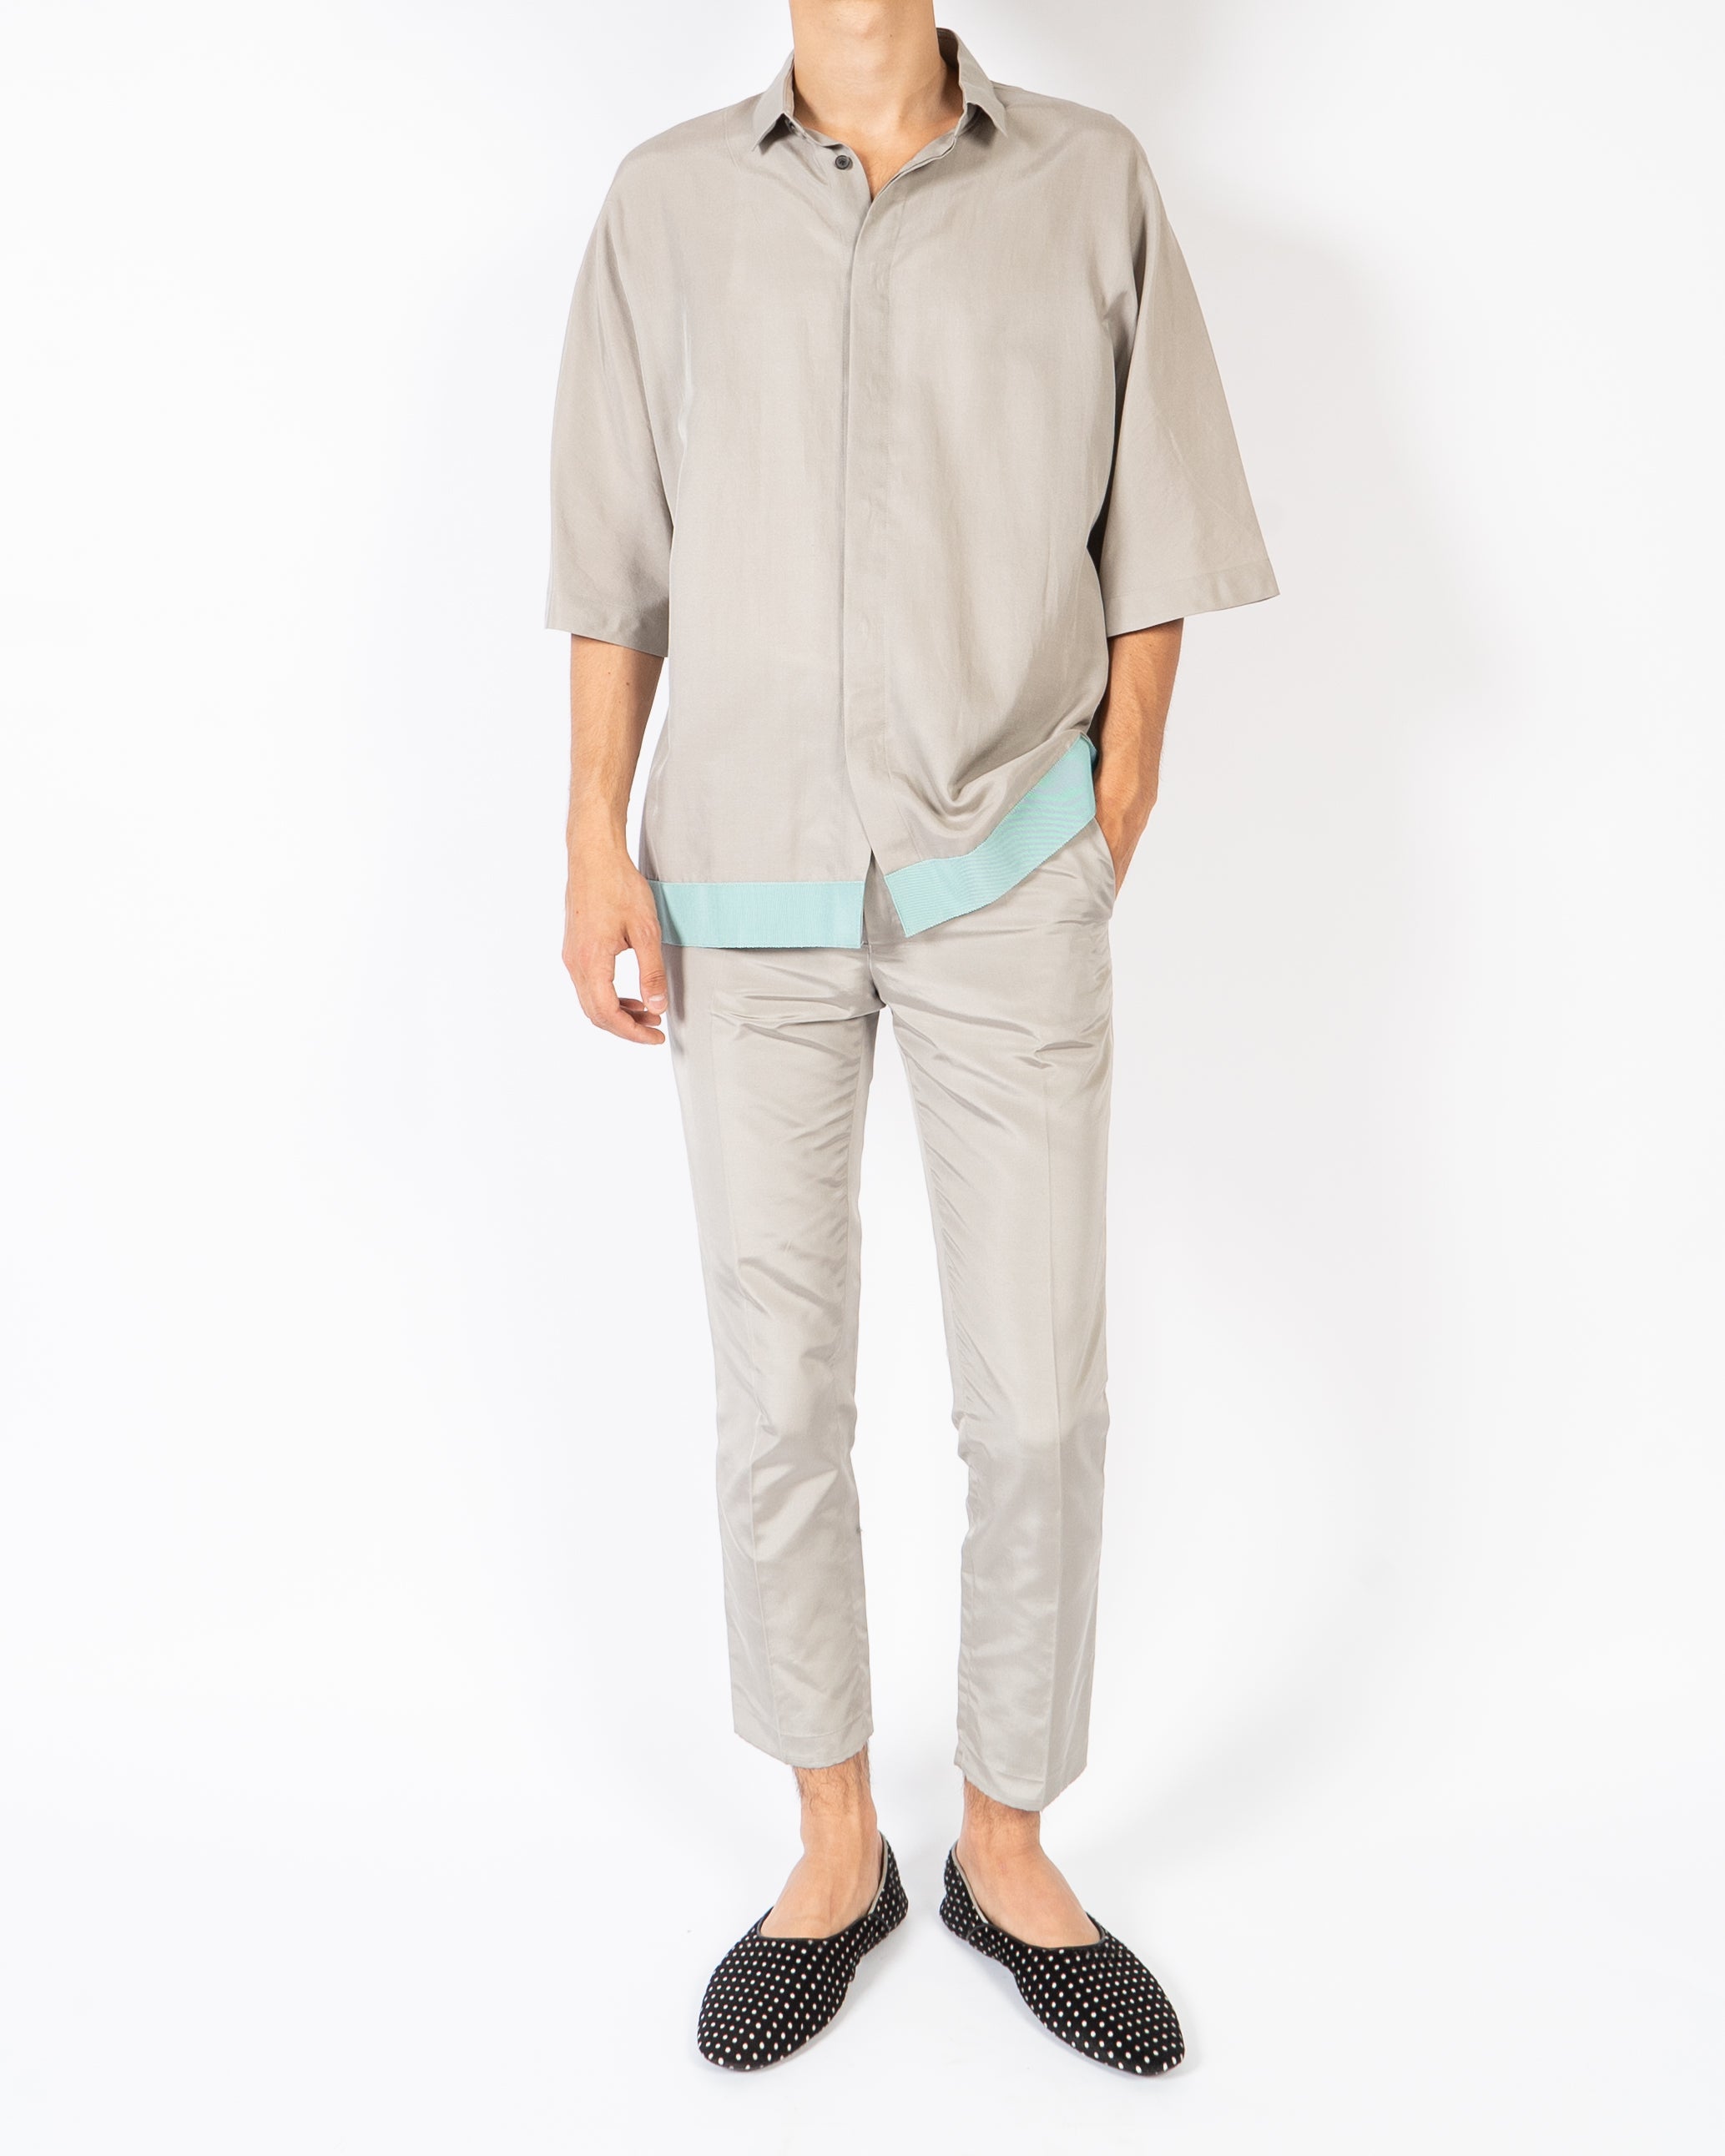 SS20 Cropped Grey Commodore Trousers